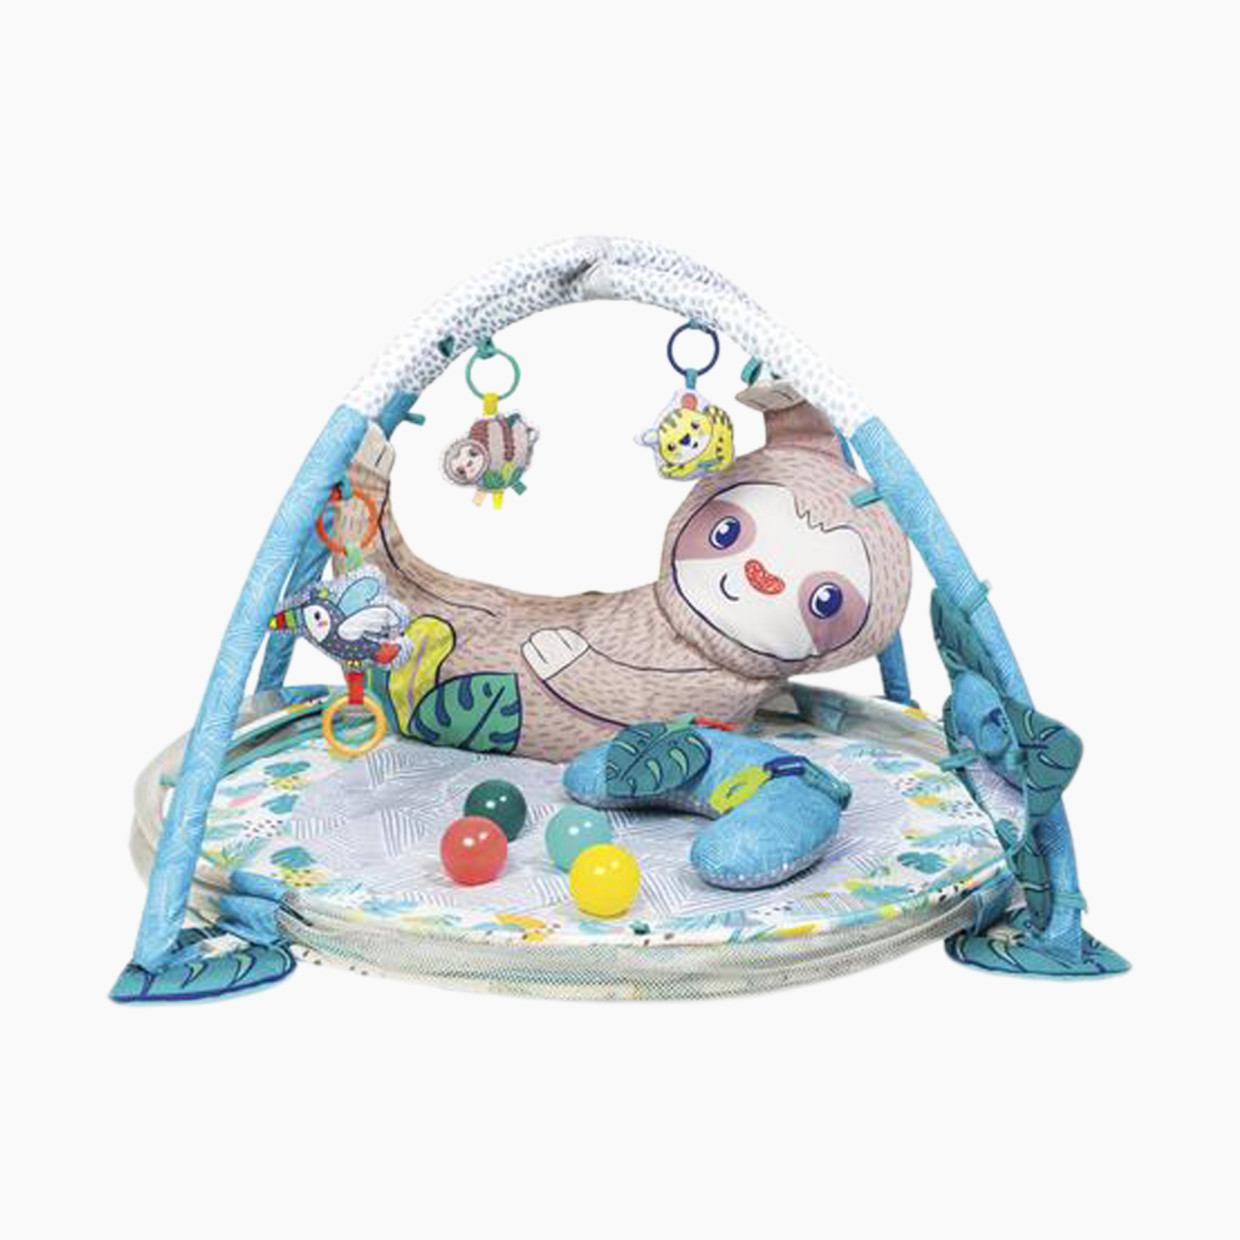 Infantino 4-in-1 Jumbo Activity Gym & Ball Pit - Sloth.